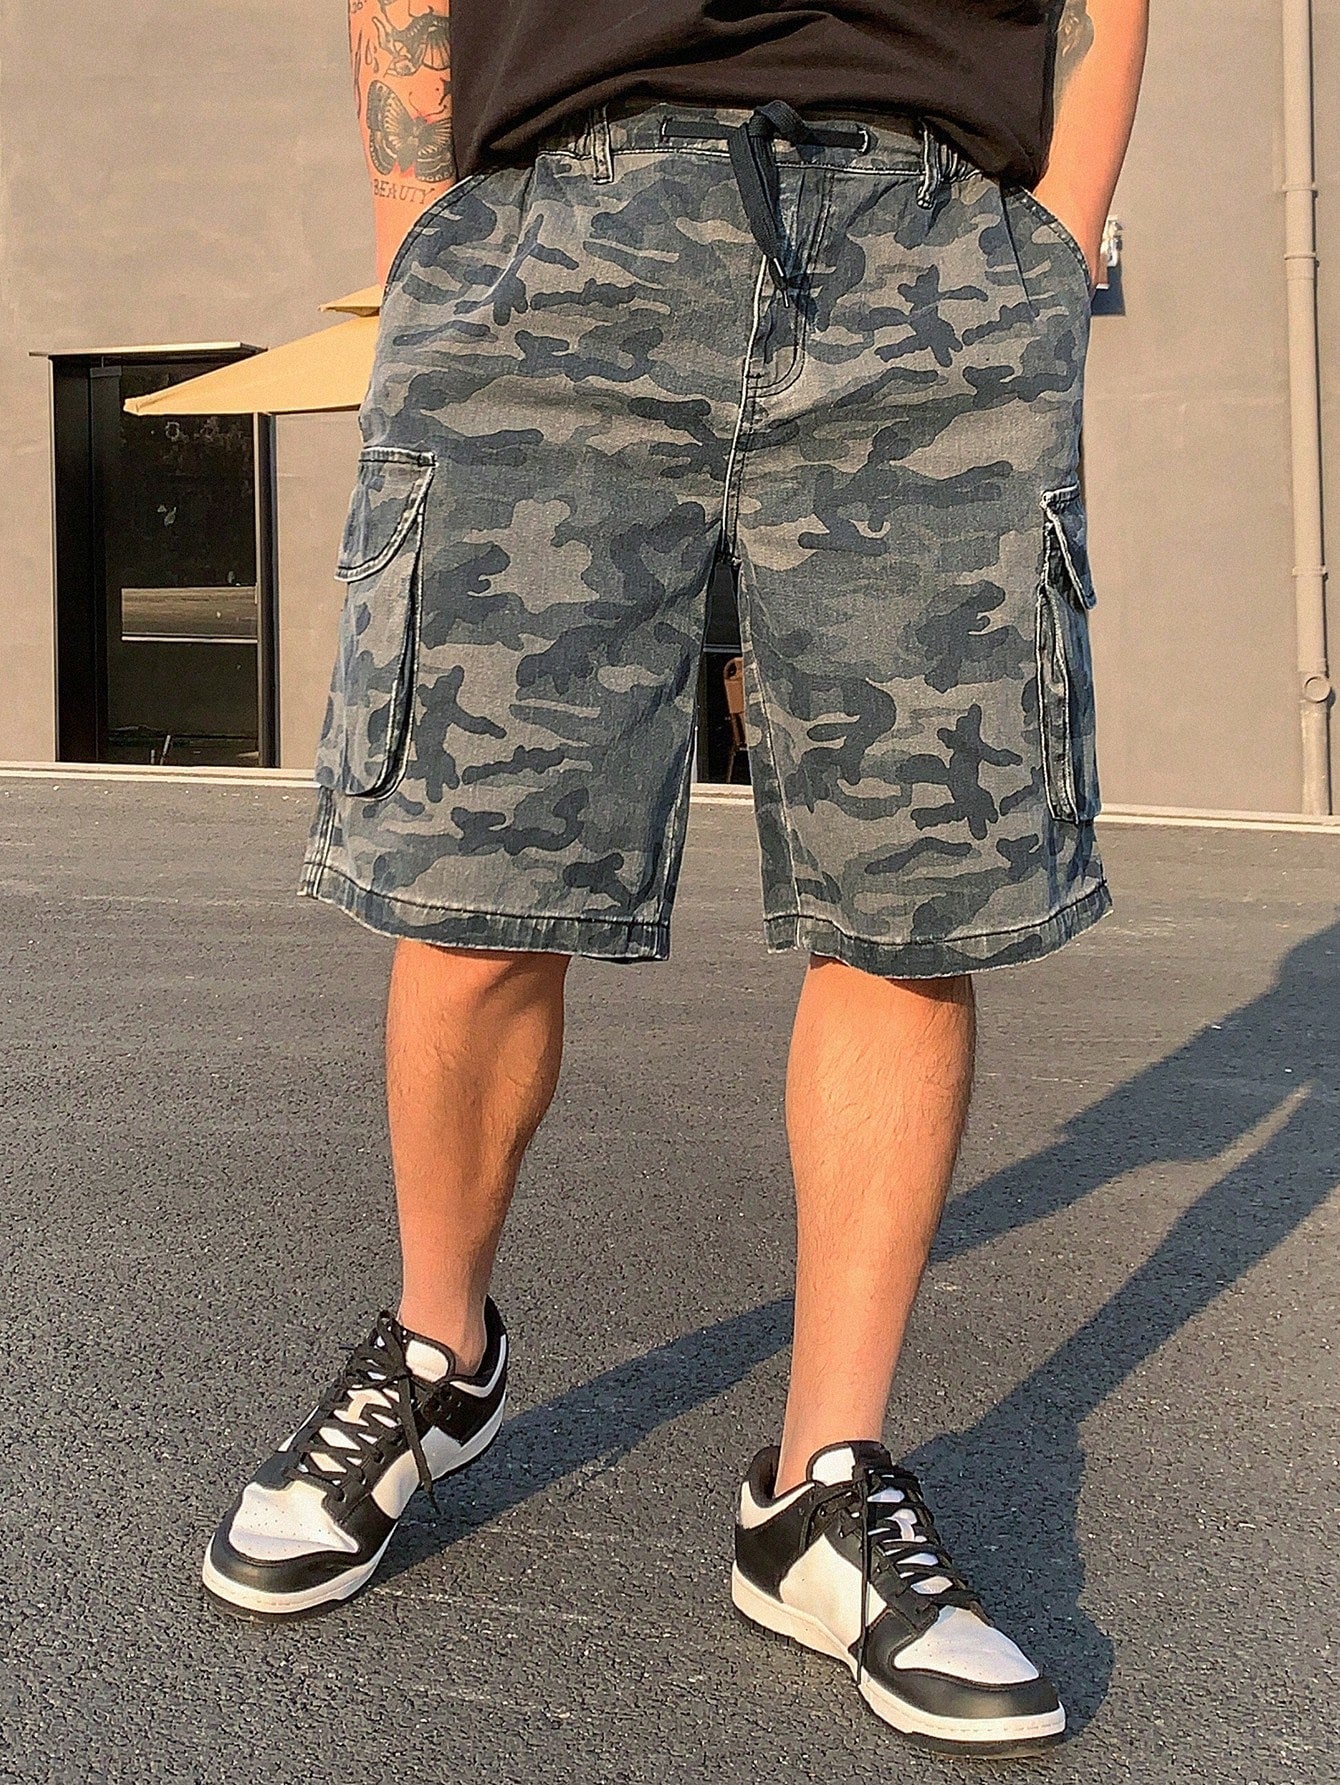 Men's Camouflage Cargo Style Camo Denim Shorts With Pockets